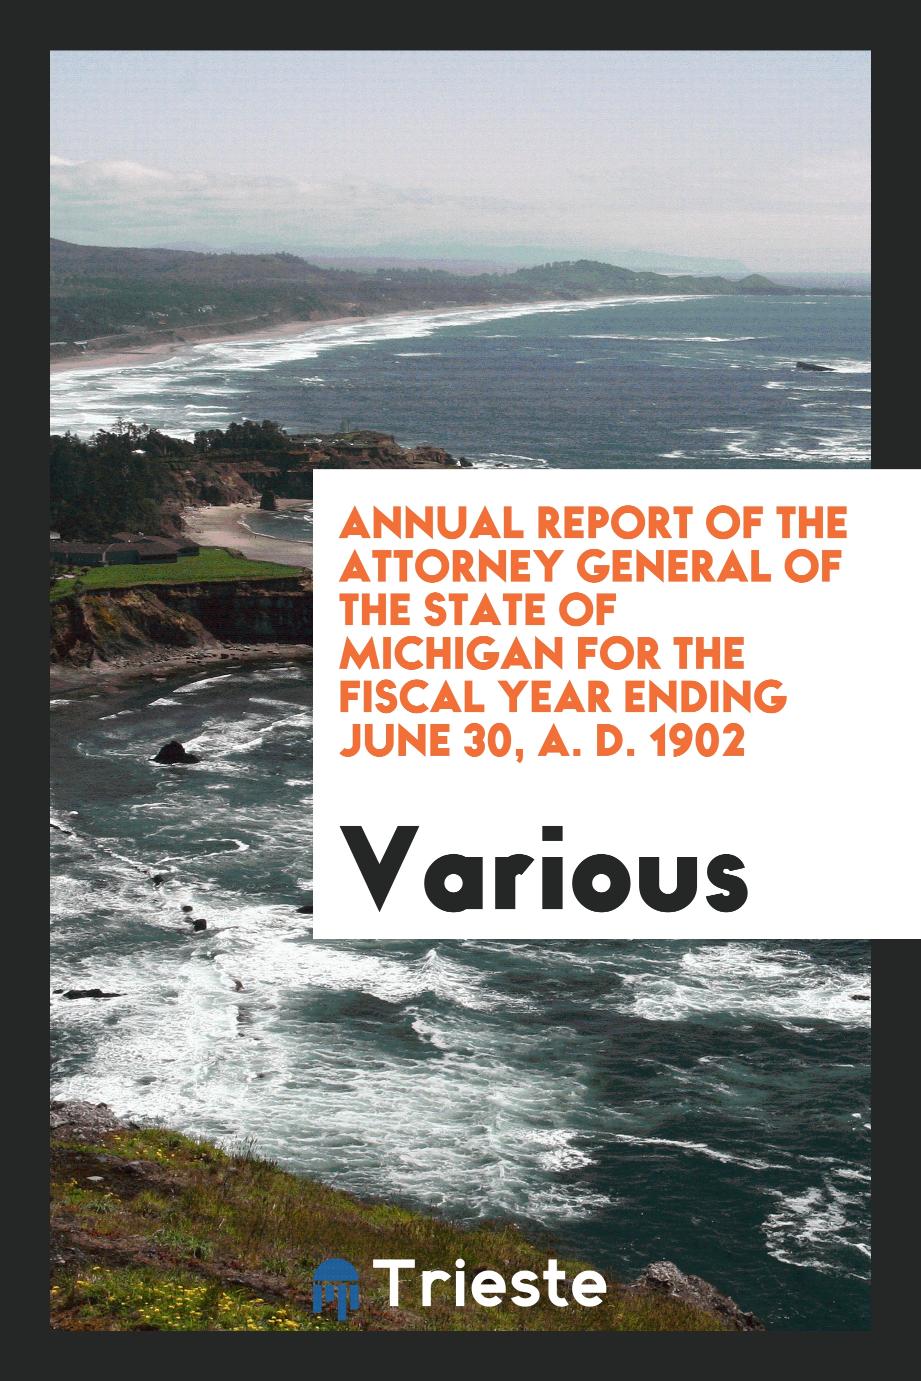 Annual Report of the Attorney General of the State of Michigan for the Fiscal Year Ending June 30, A. D. 1902